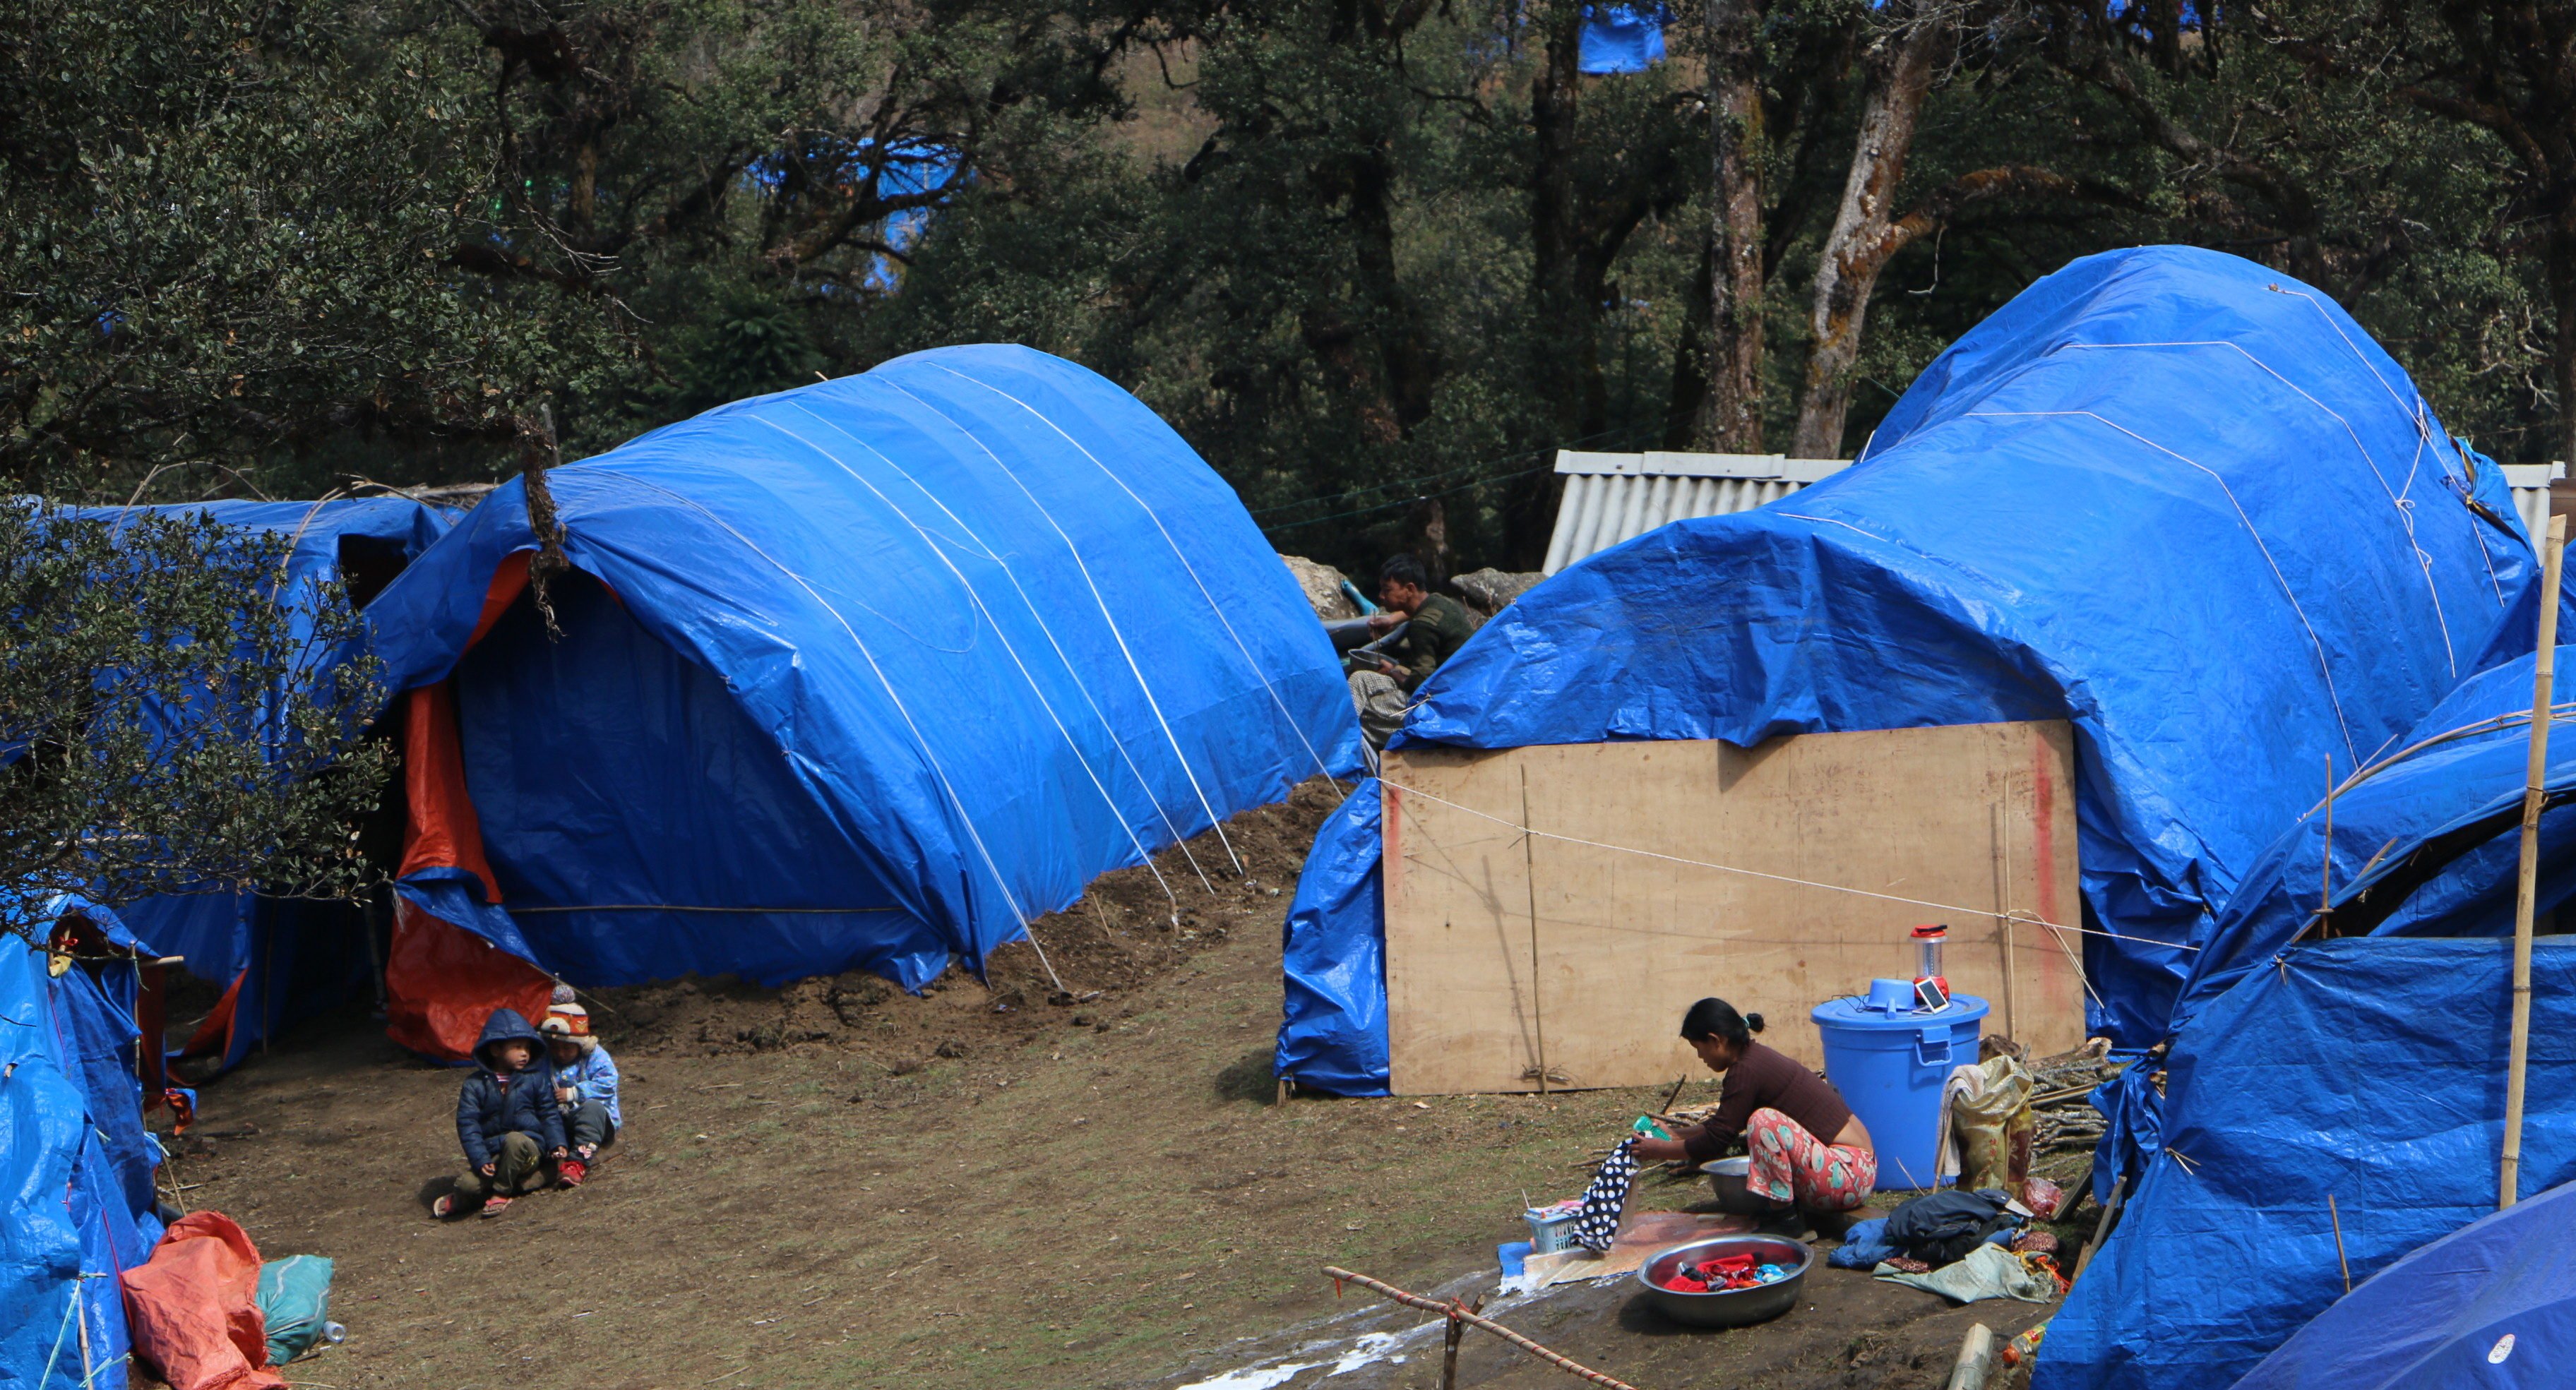 Sha It Yang IDP camp, which houses more than 2,000 people displaced by the conflict in Kachin State.